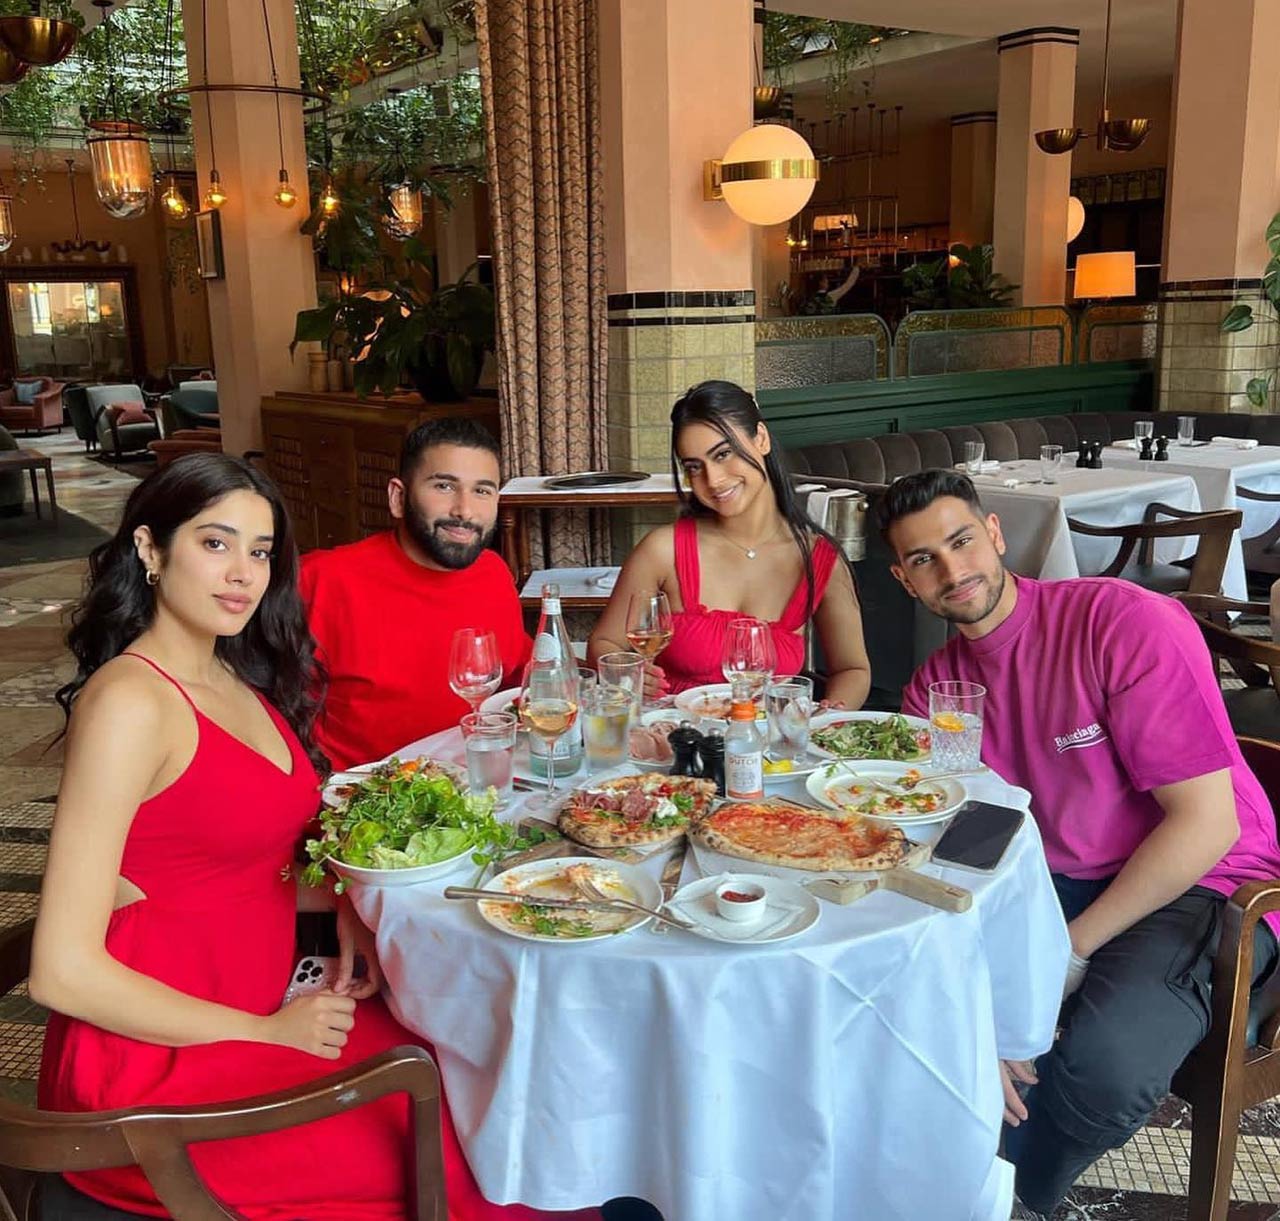 Janhvi Kapoor, Nysa Devgn twinned in red in one of the pictures shared by the 'Dhadak' actress. The rest of the pictures were shared by their common friend Orhan